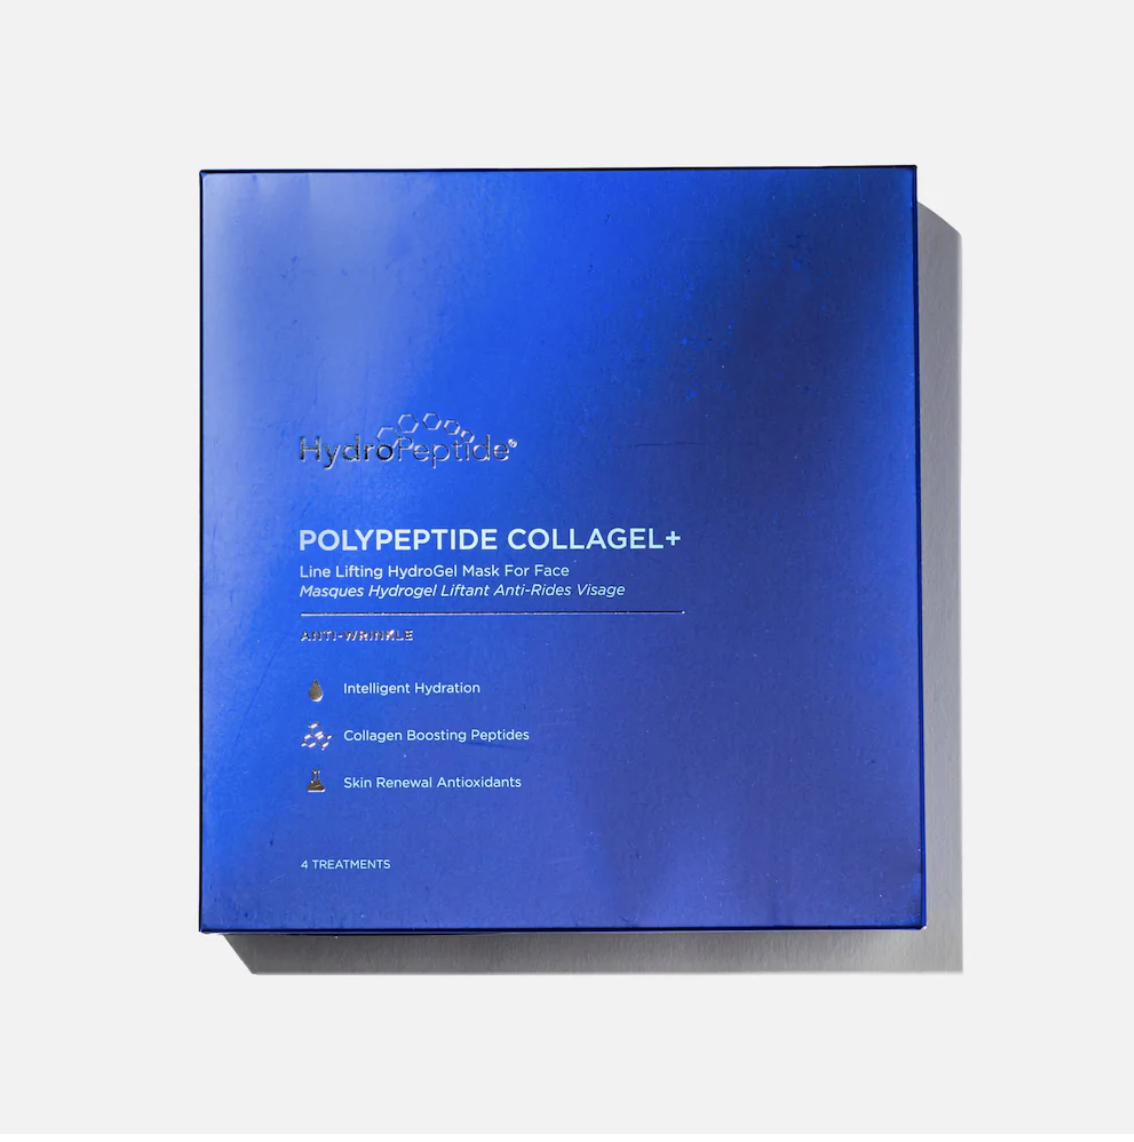 Polypeptide Collagen Mask for Face